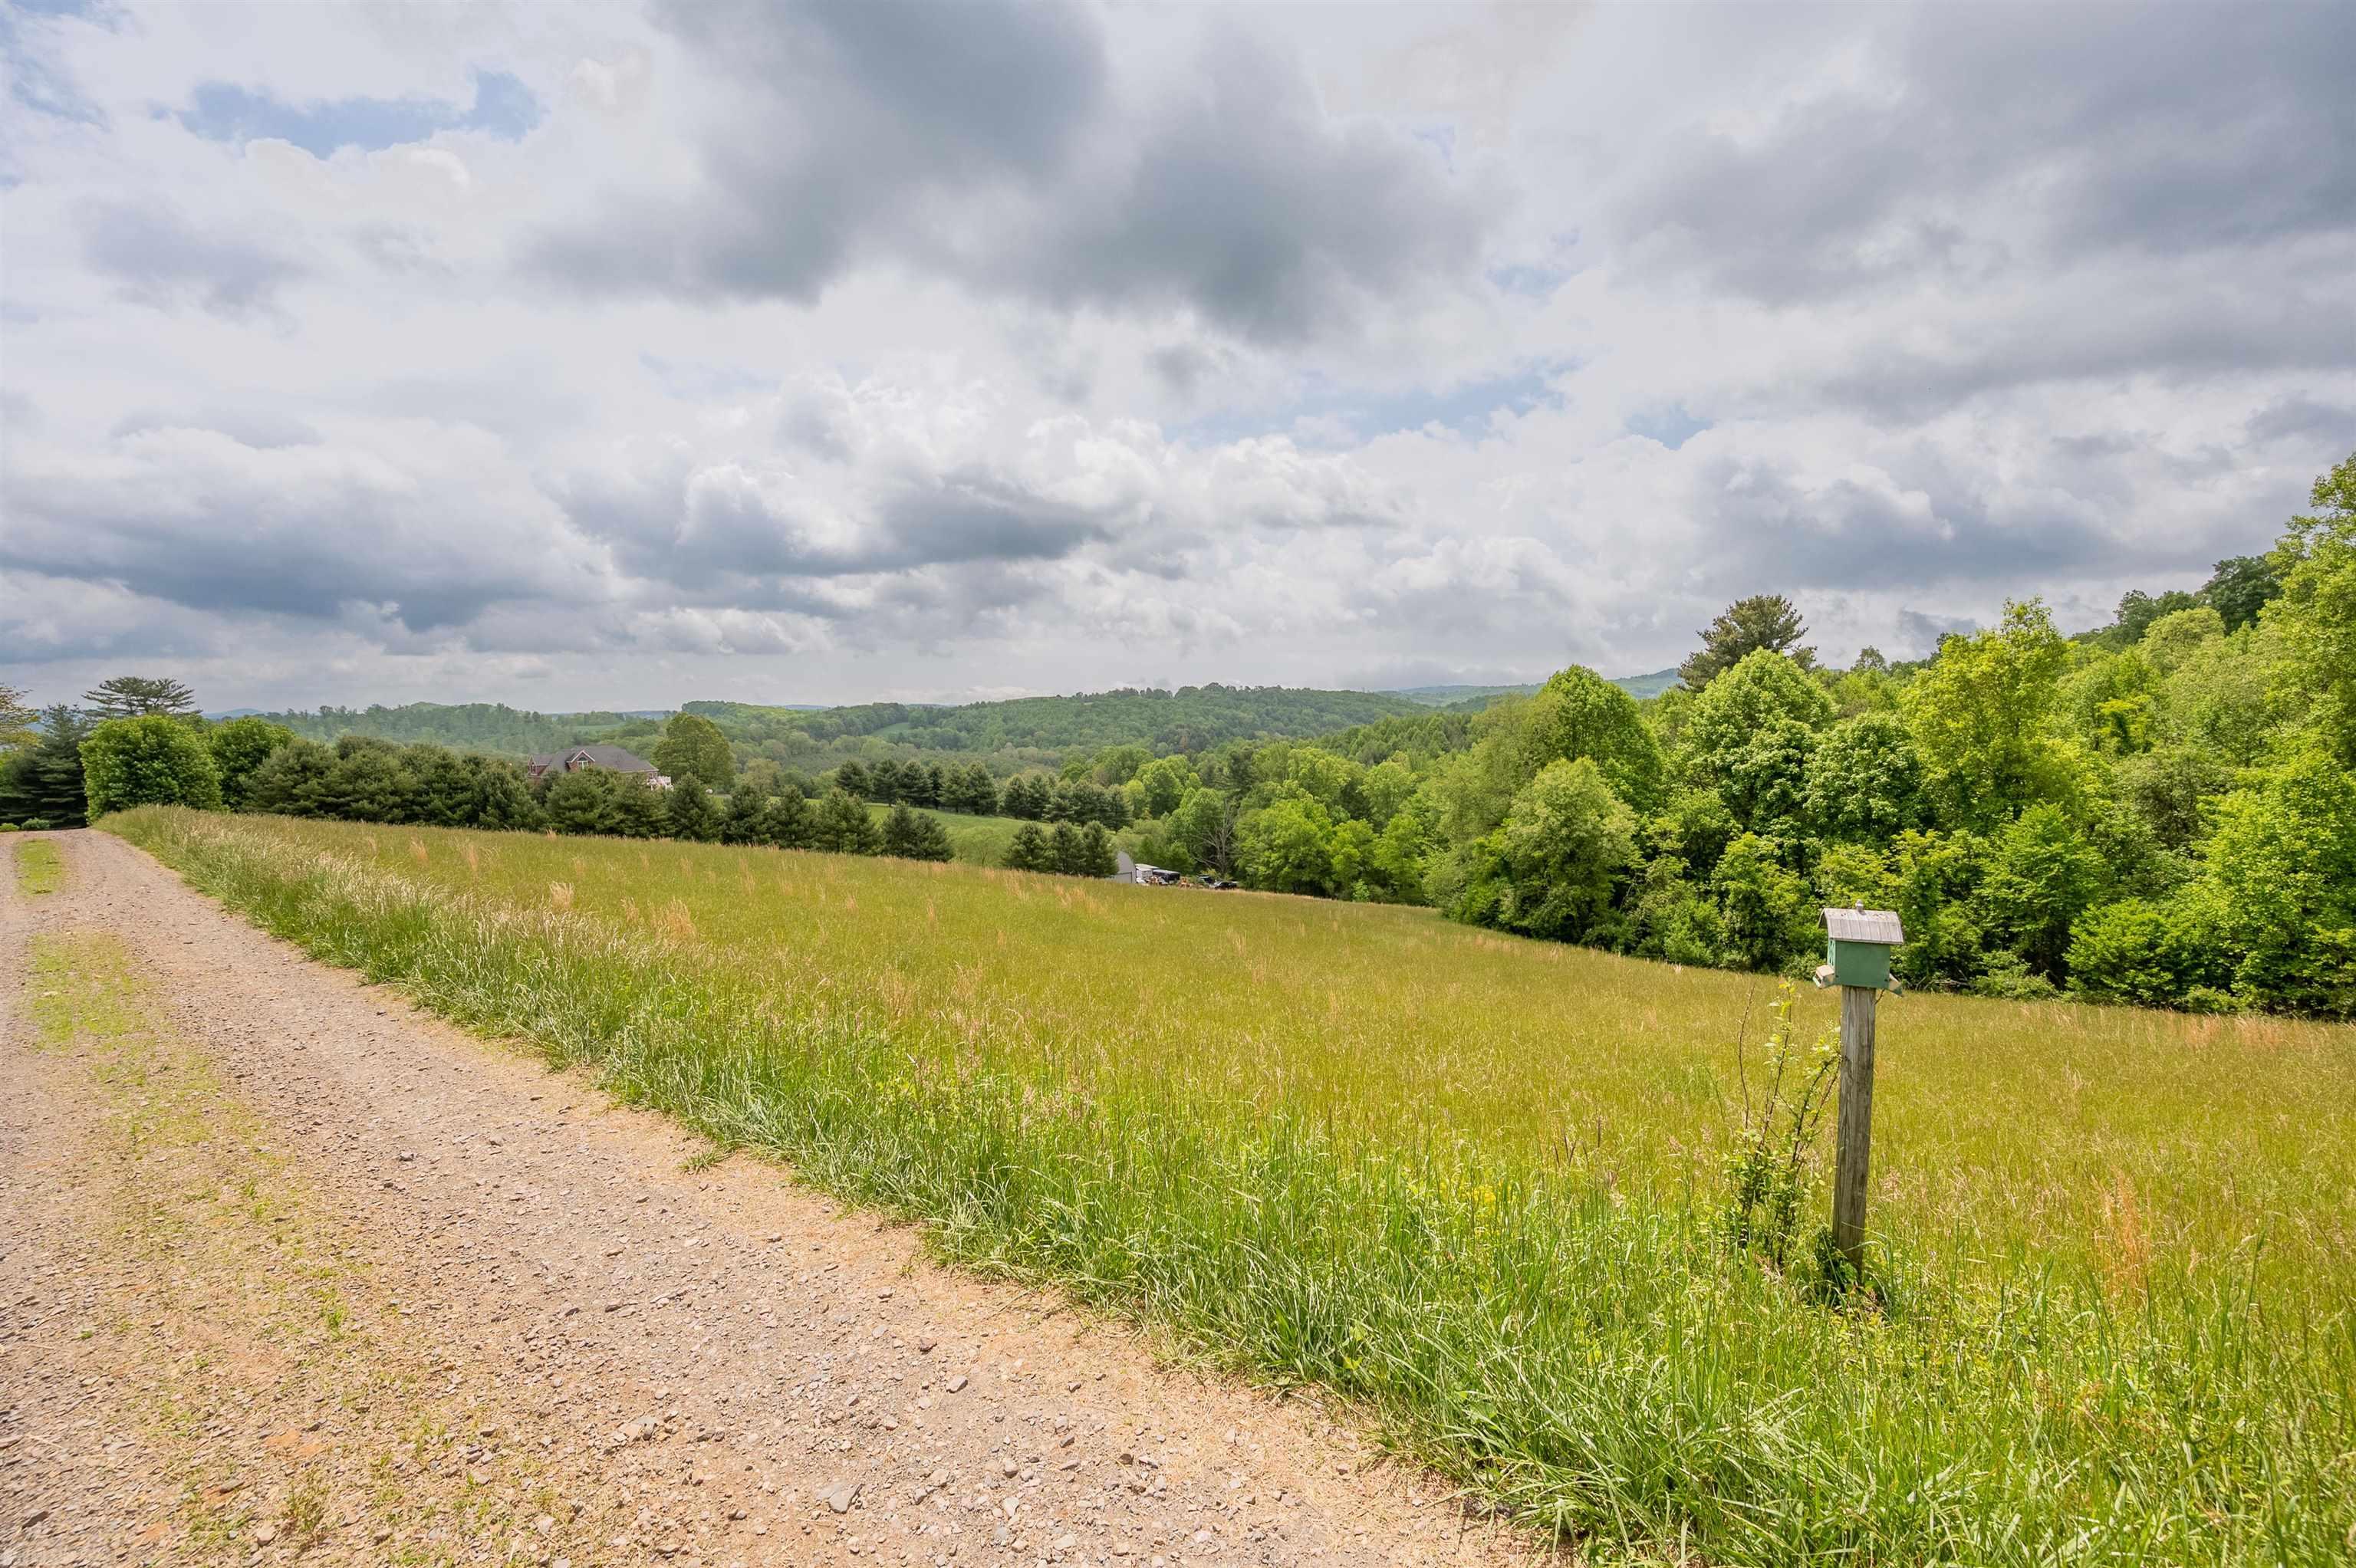 This is a beautiful spot to build a dream home, with fantastic views.  The land is situation away from the main road and offers a very quite and relaxing place to live.  For those wanting to be near the Blue Ridge Parkway and enjoy all four seasons, this is a place you will want to check out.